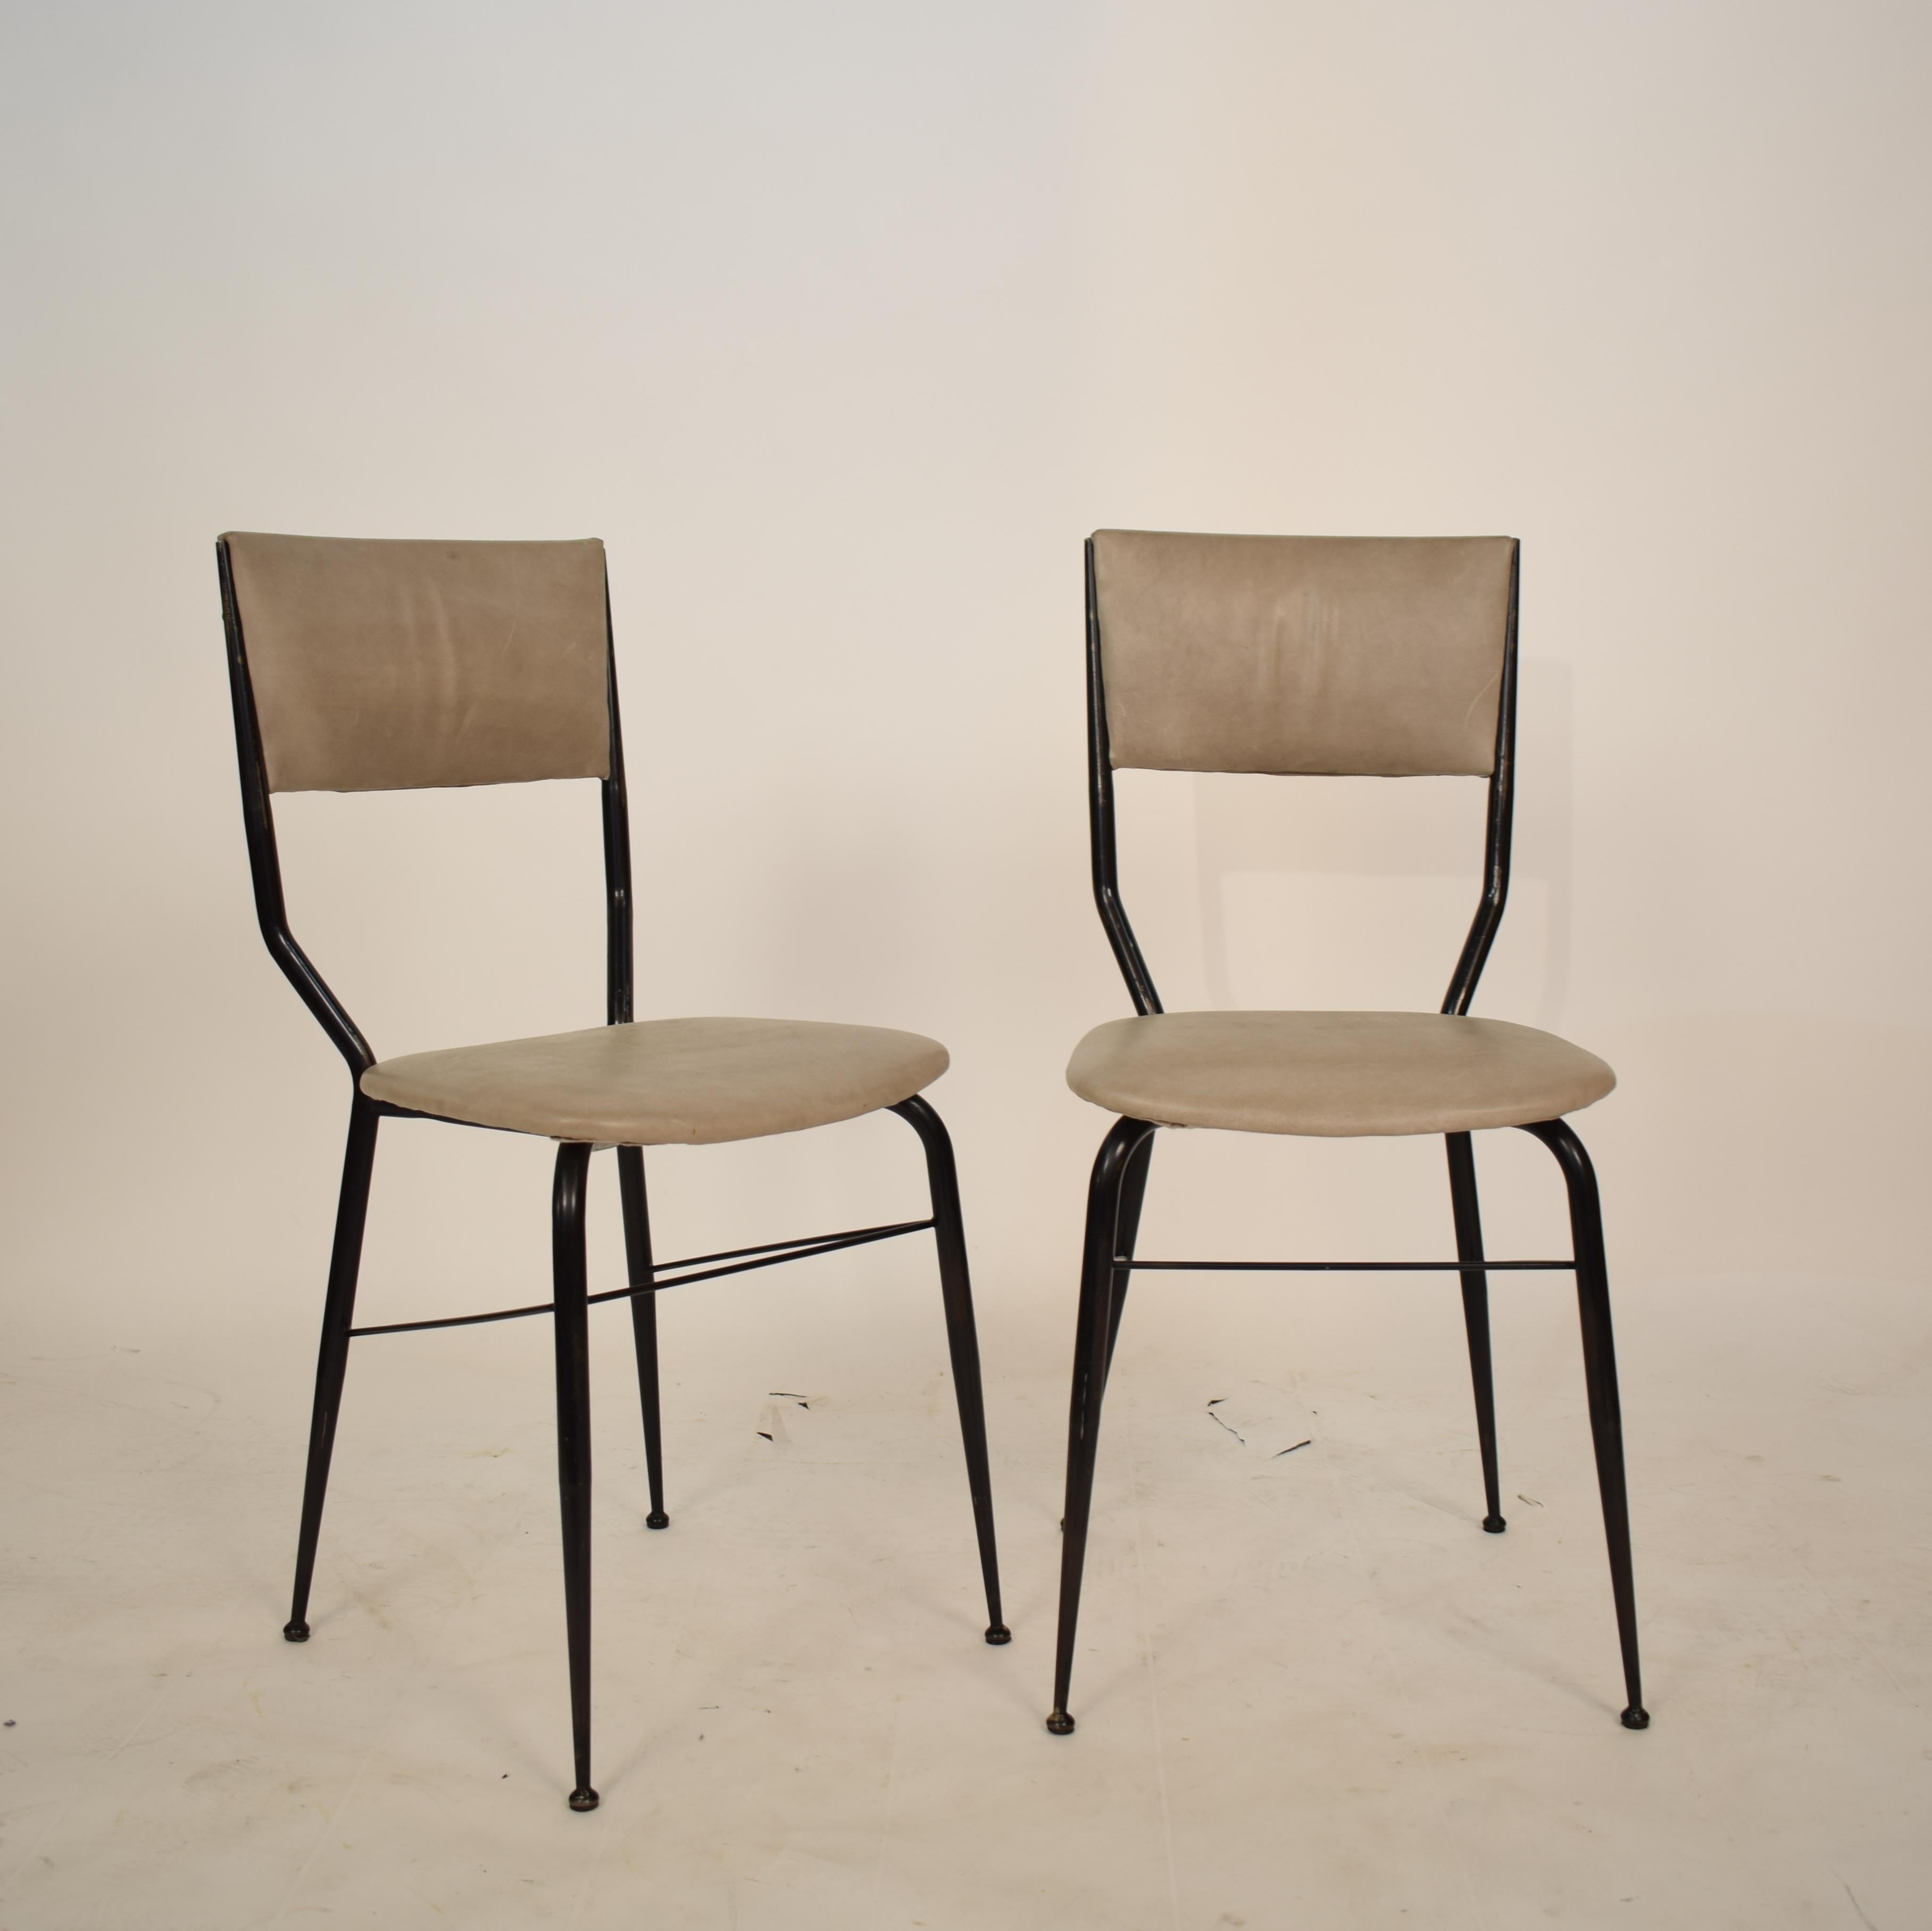 This pair of midcentury dining chairs from the 1950s where designed and manufactured in Italy. The chairs consist of an elegant black metal frame and a padded grey leather seat and backrest. The chairs has been newly reupholstered in gray leather.